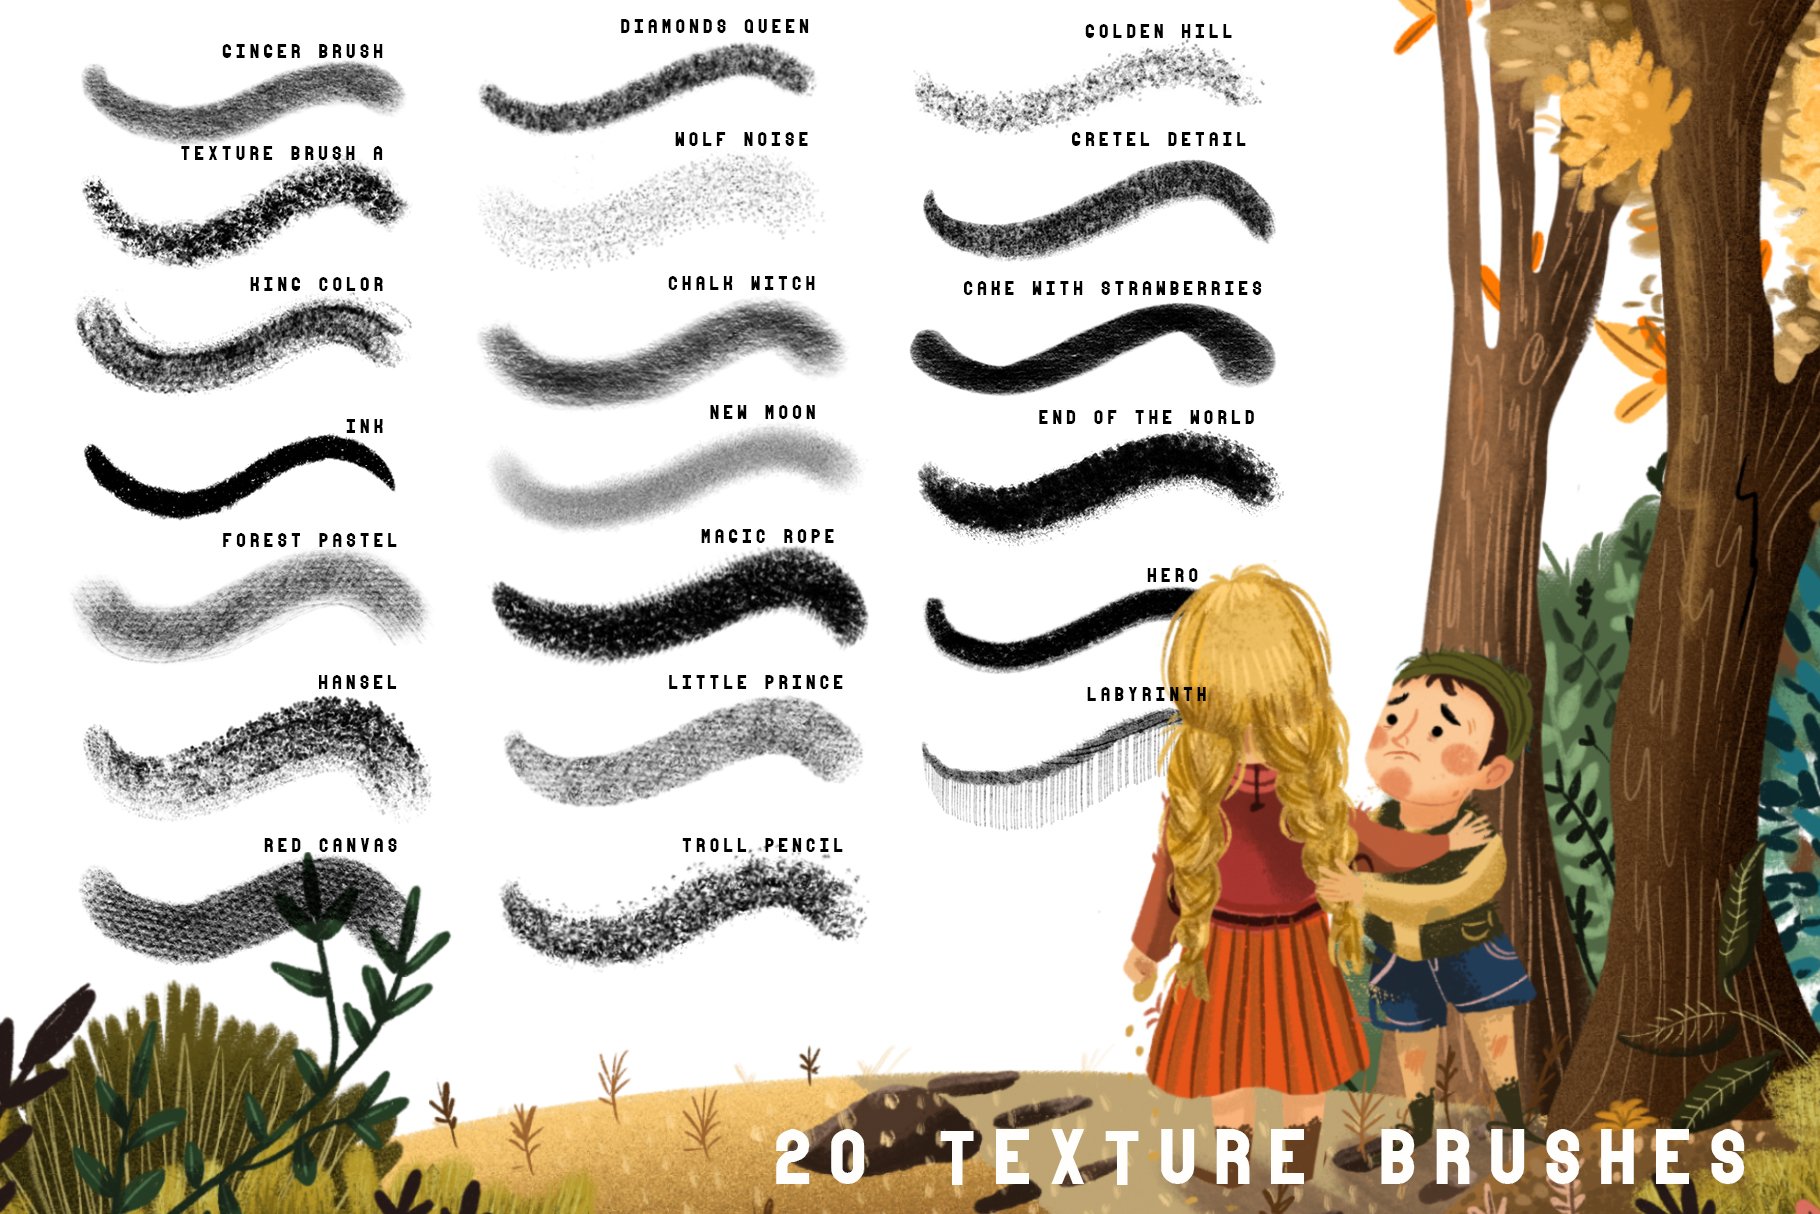 Collection includes 20 texture brushes.